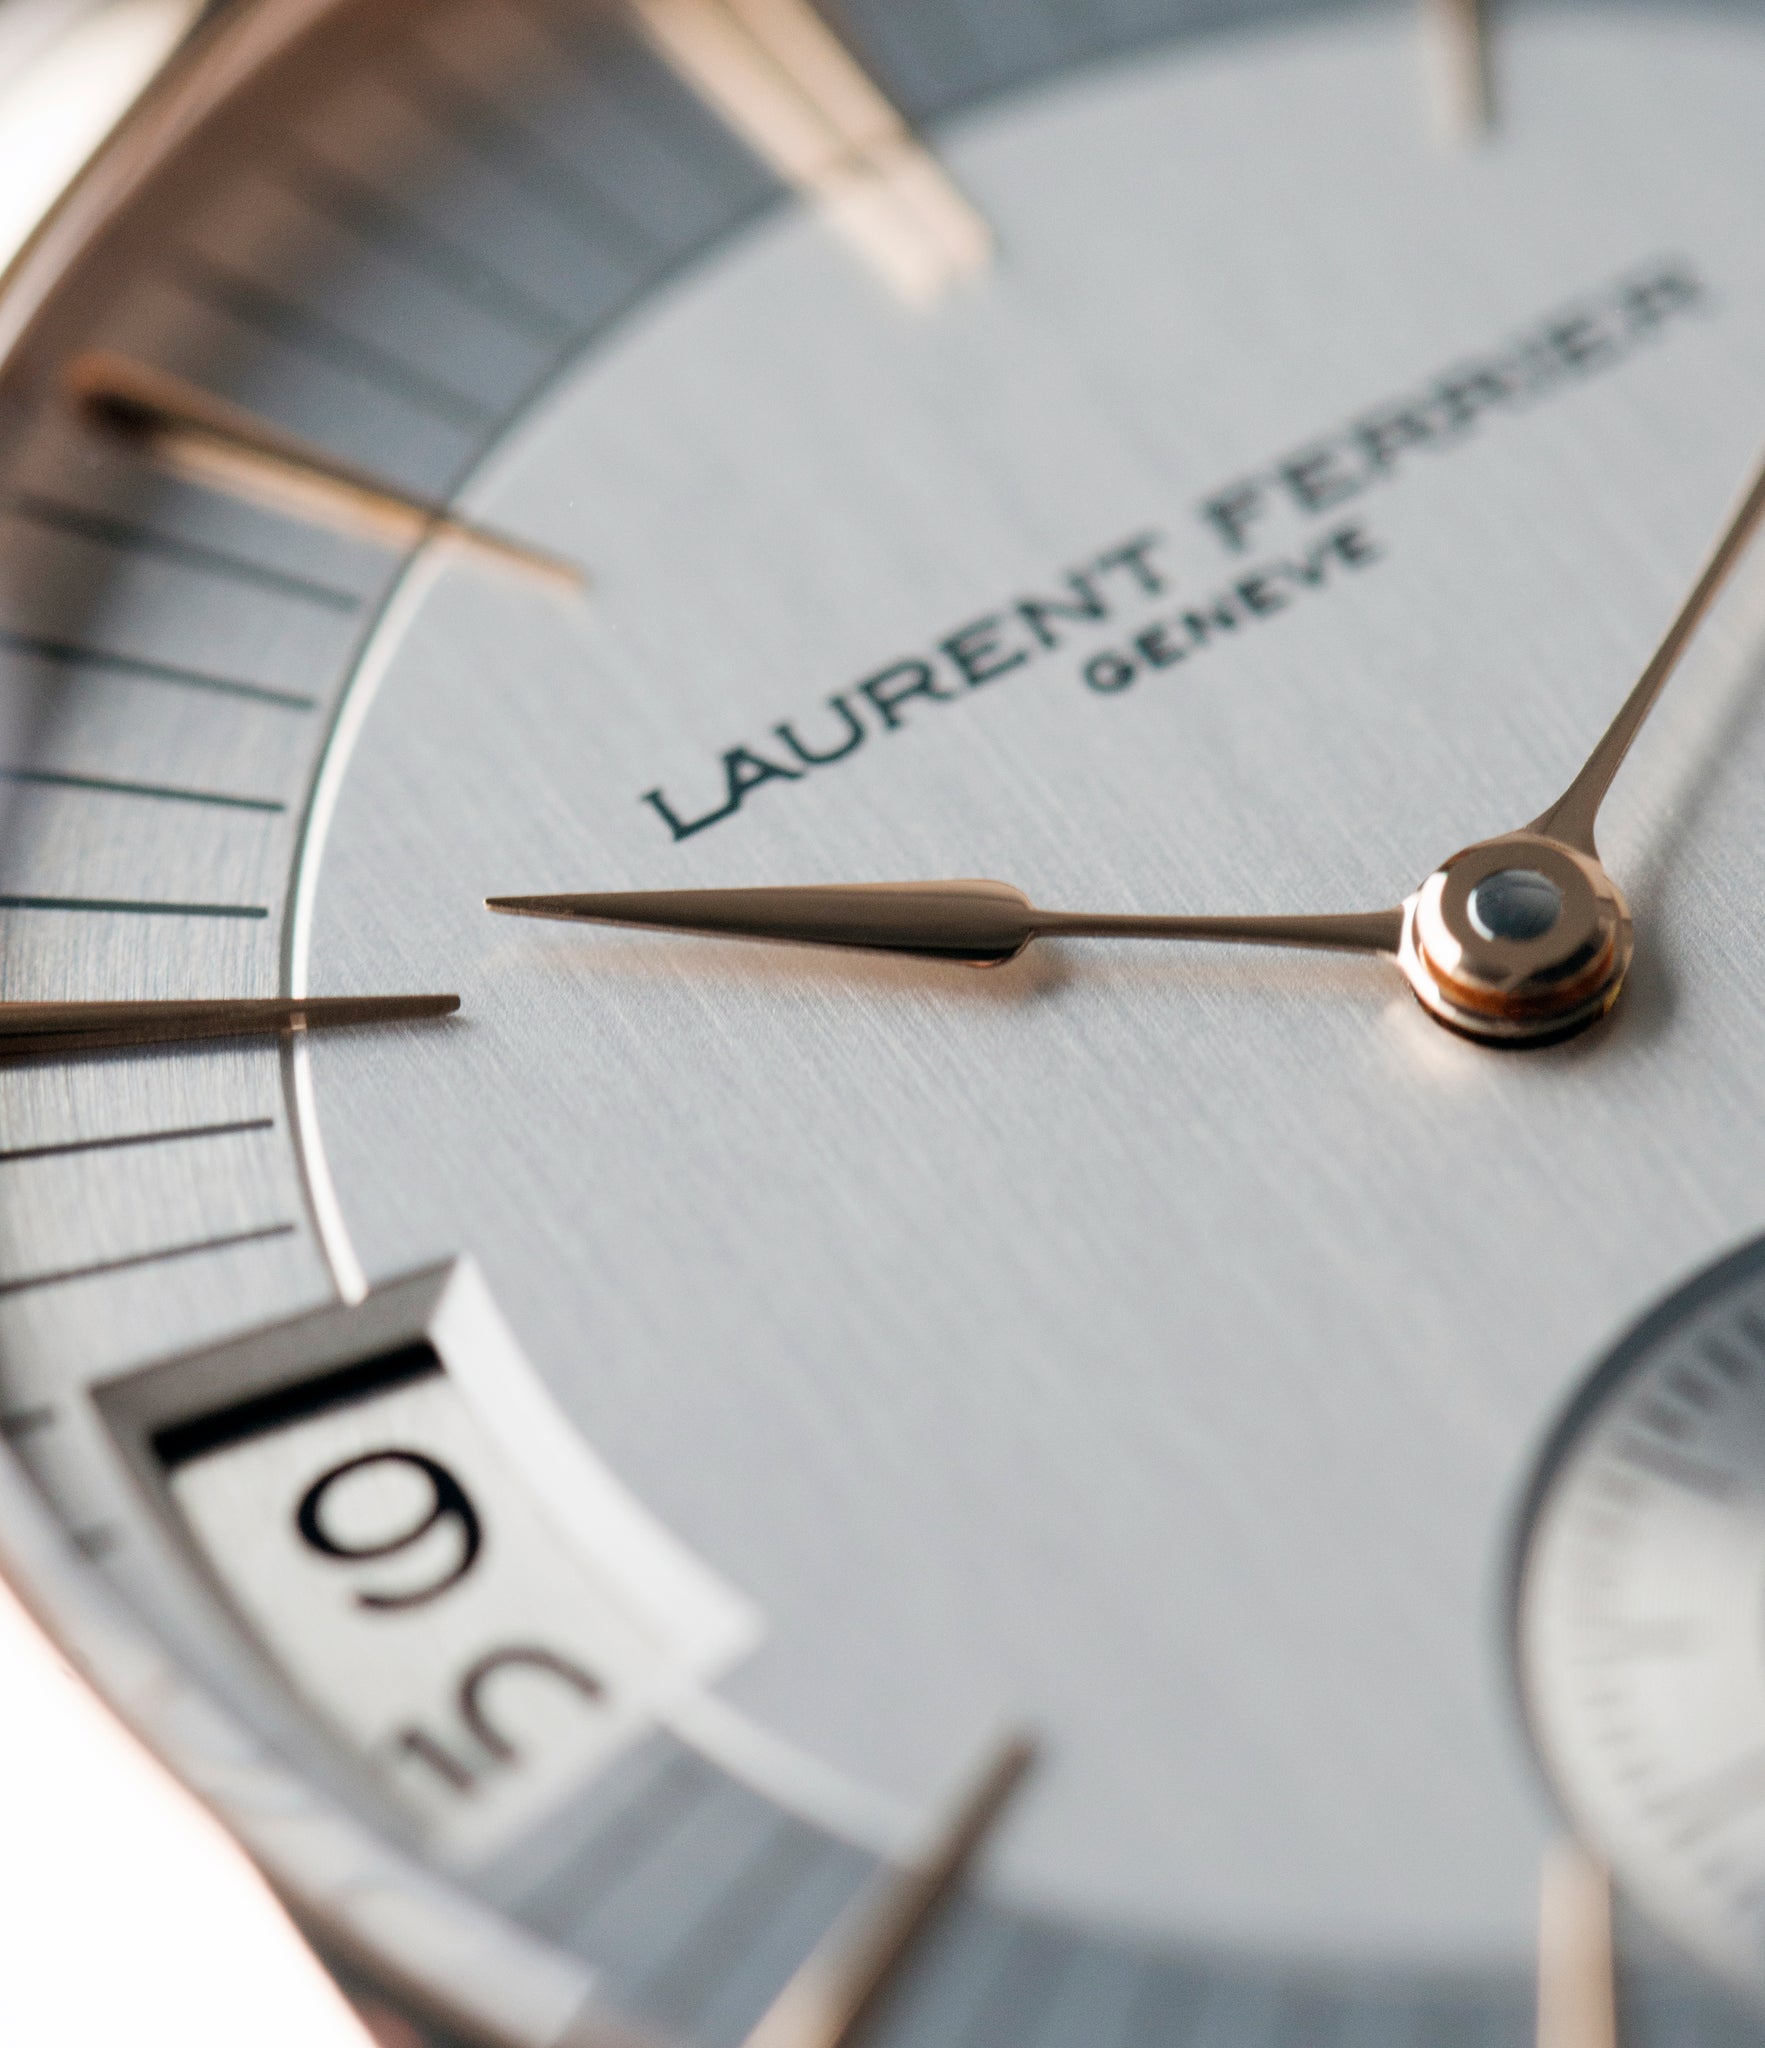 elegant traveller watch Laurent Ferrier Galet Traveller Micro Rotor LF 230.01 rose gold watch additional prototype dial for sale online at A Collected Man London UK approved reseller of preowned independent watchmakers